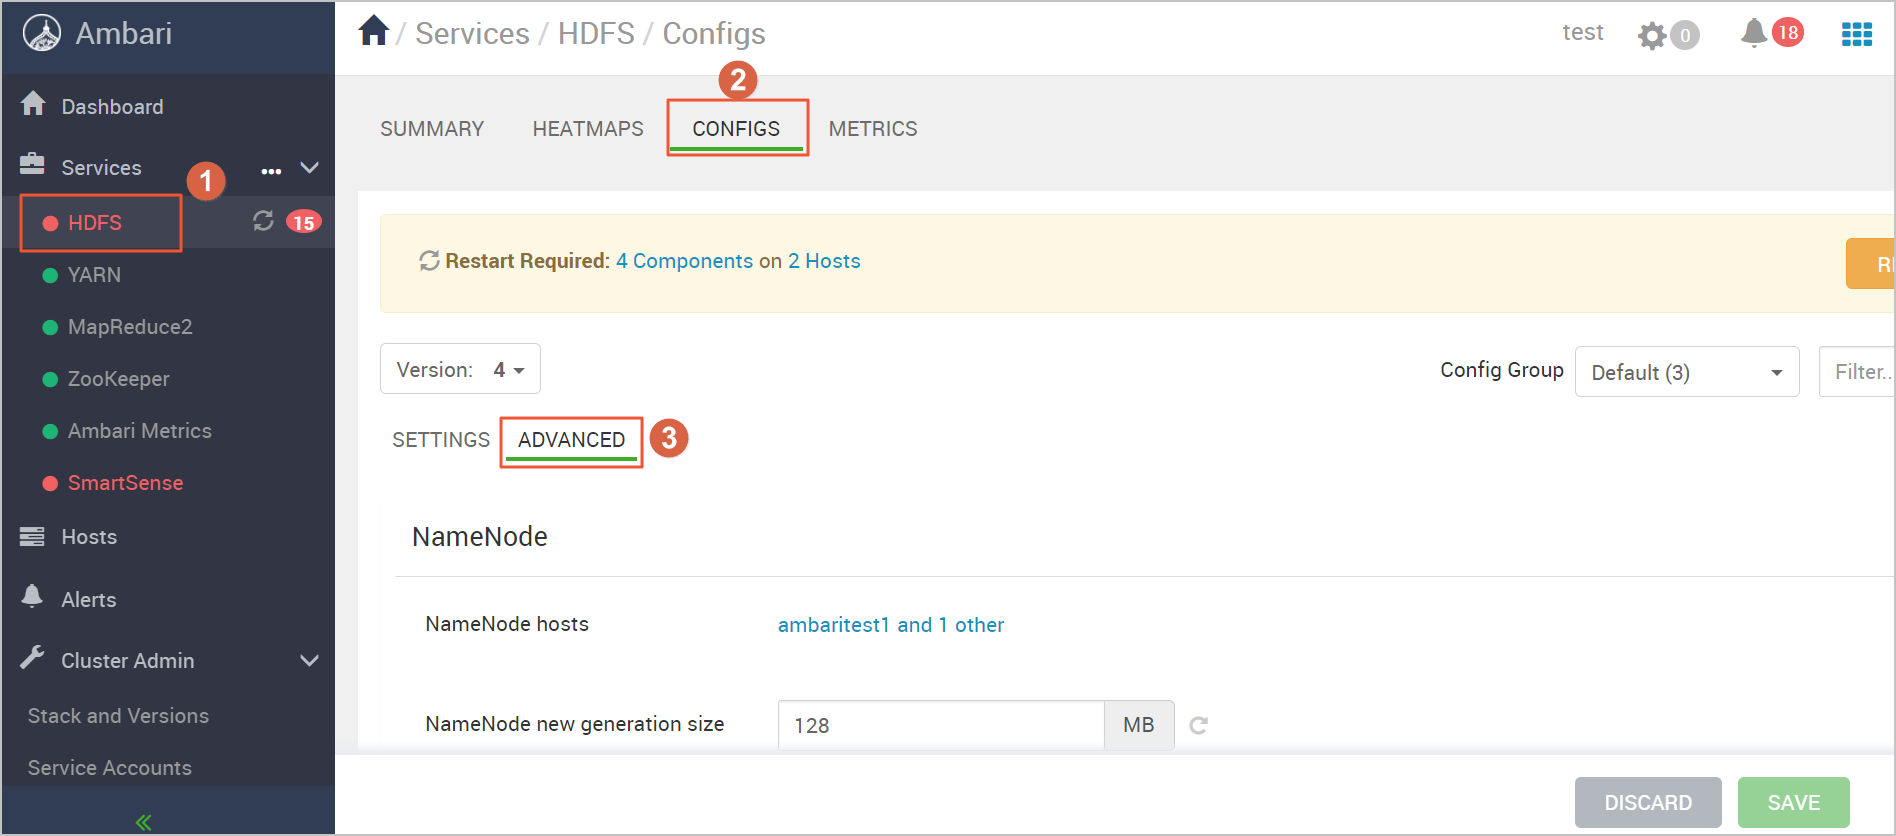 HDFS configuration page